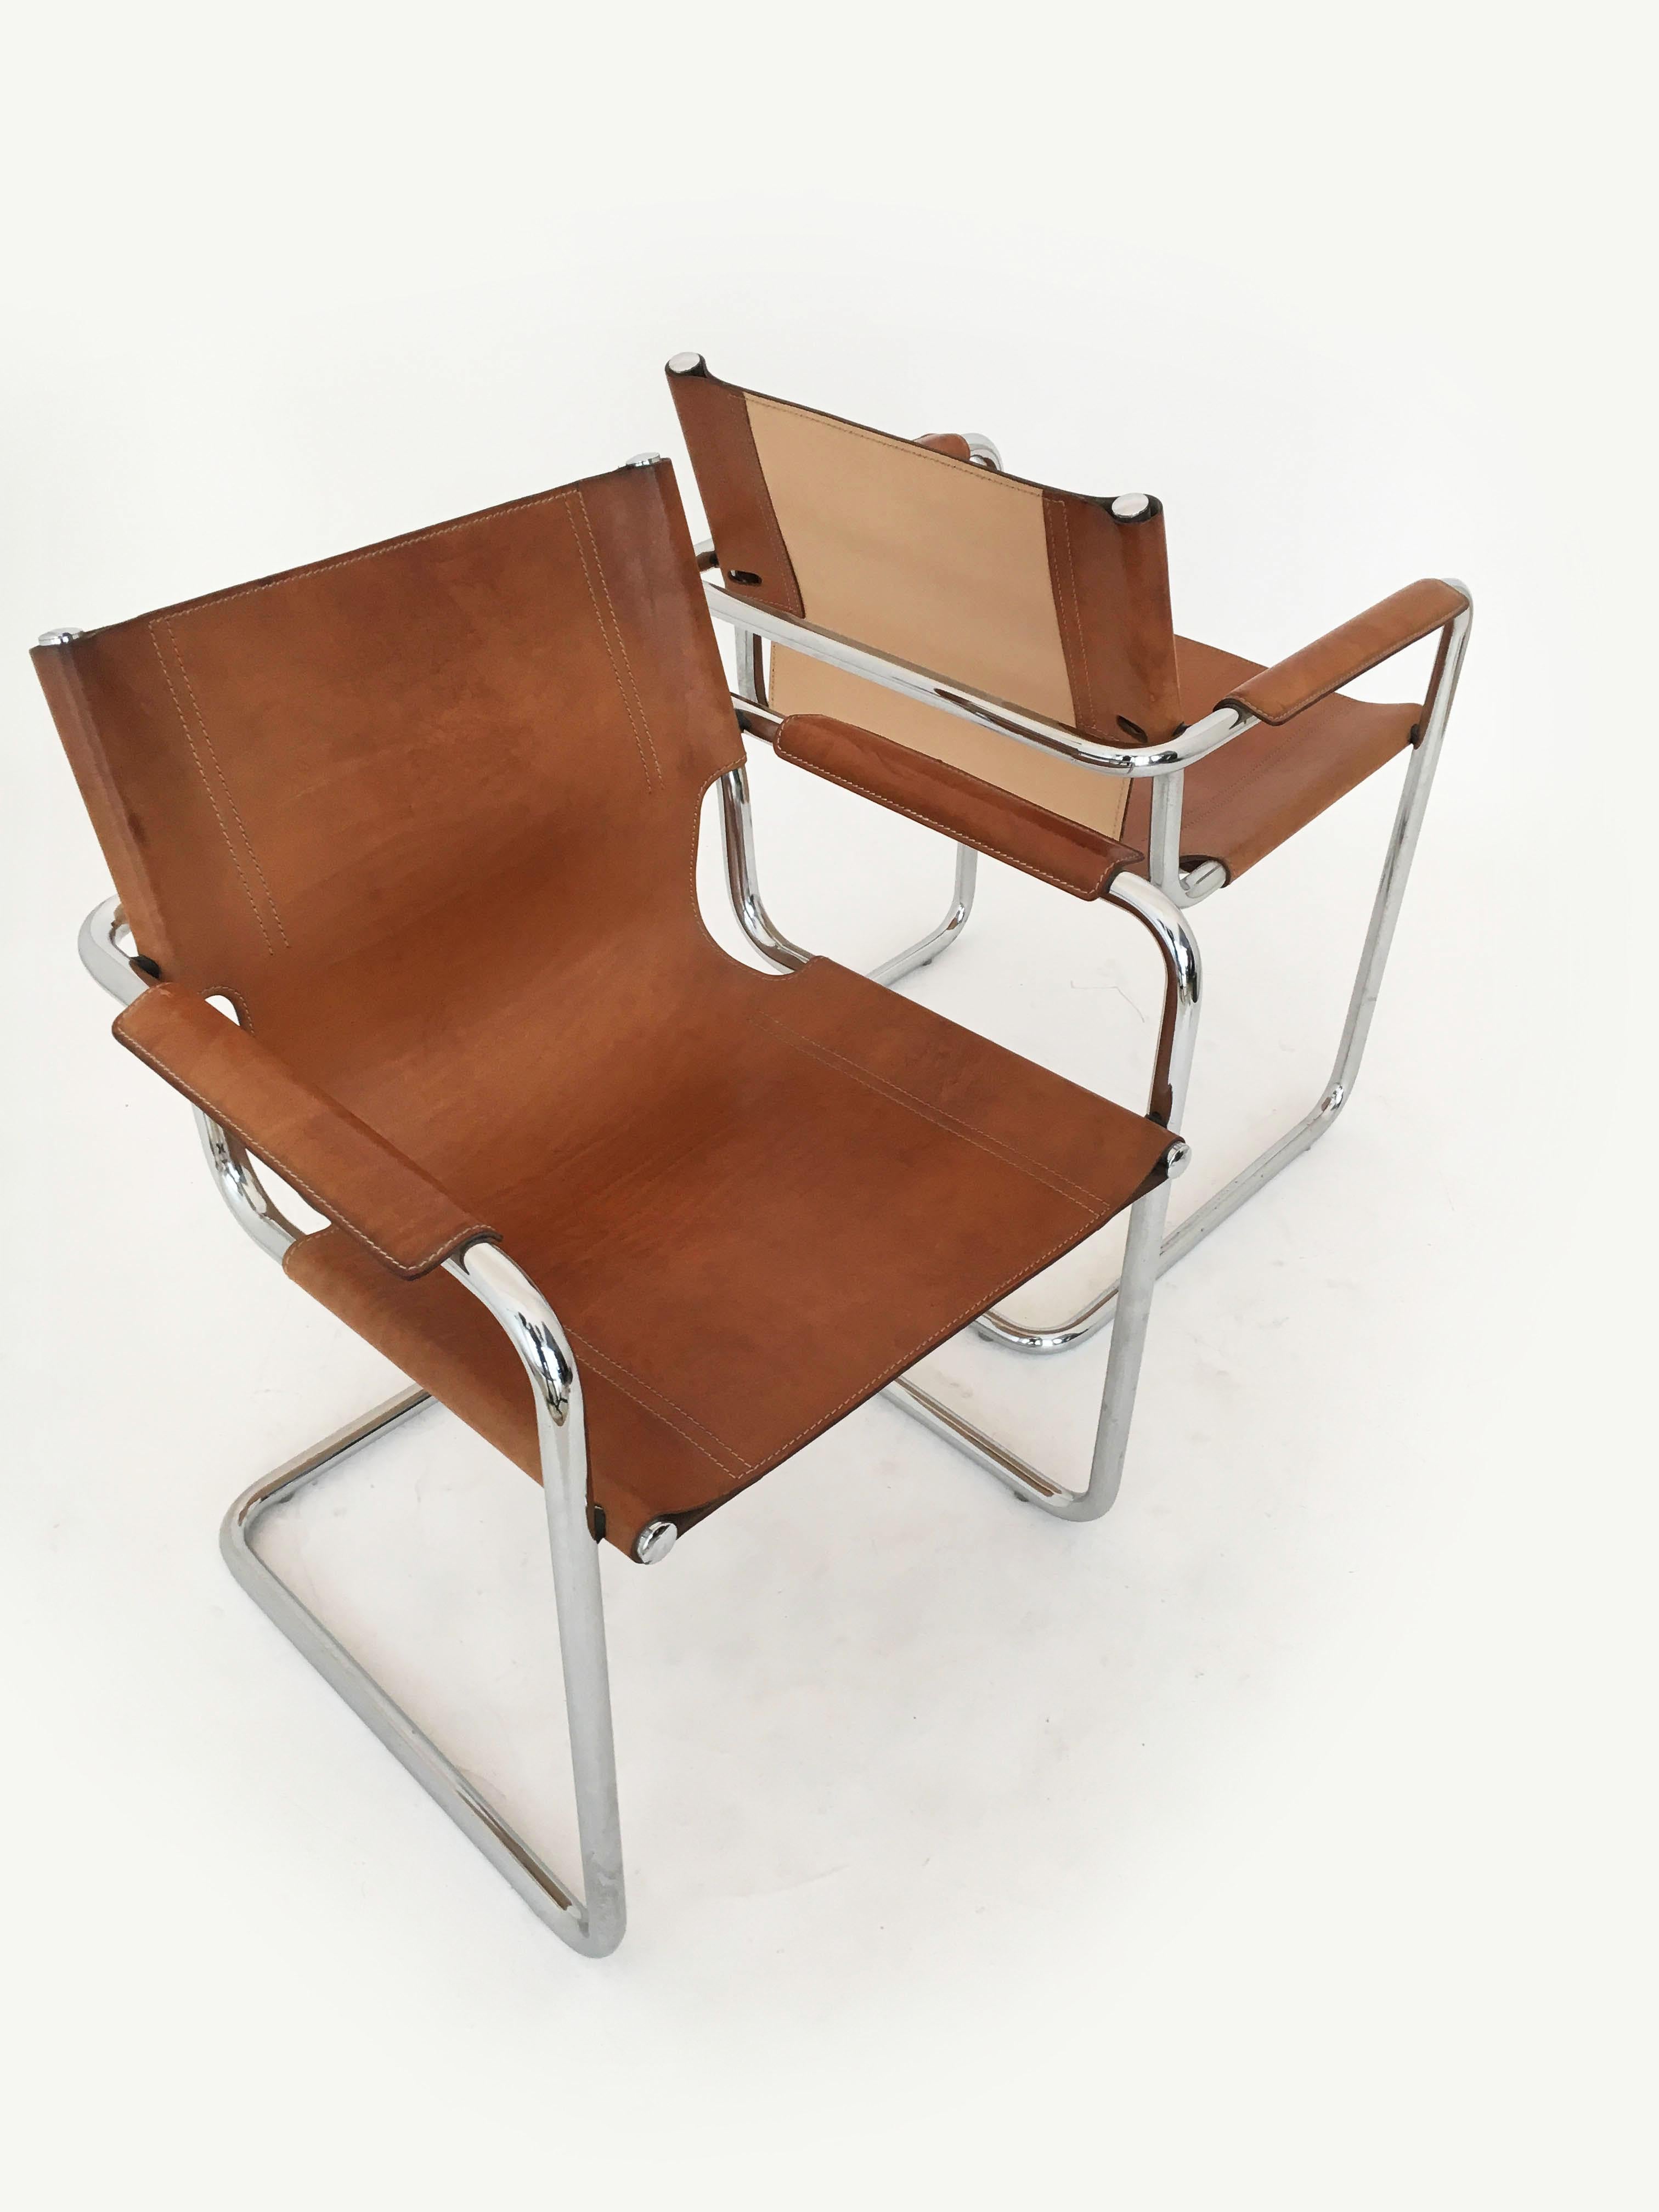 Matteo Grassi Cantilever Visitor Side Chairs Pair, Italy, 1970s For Sale 3